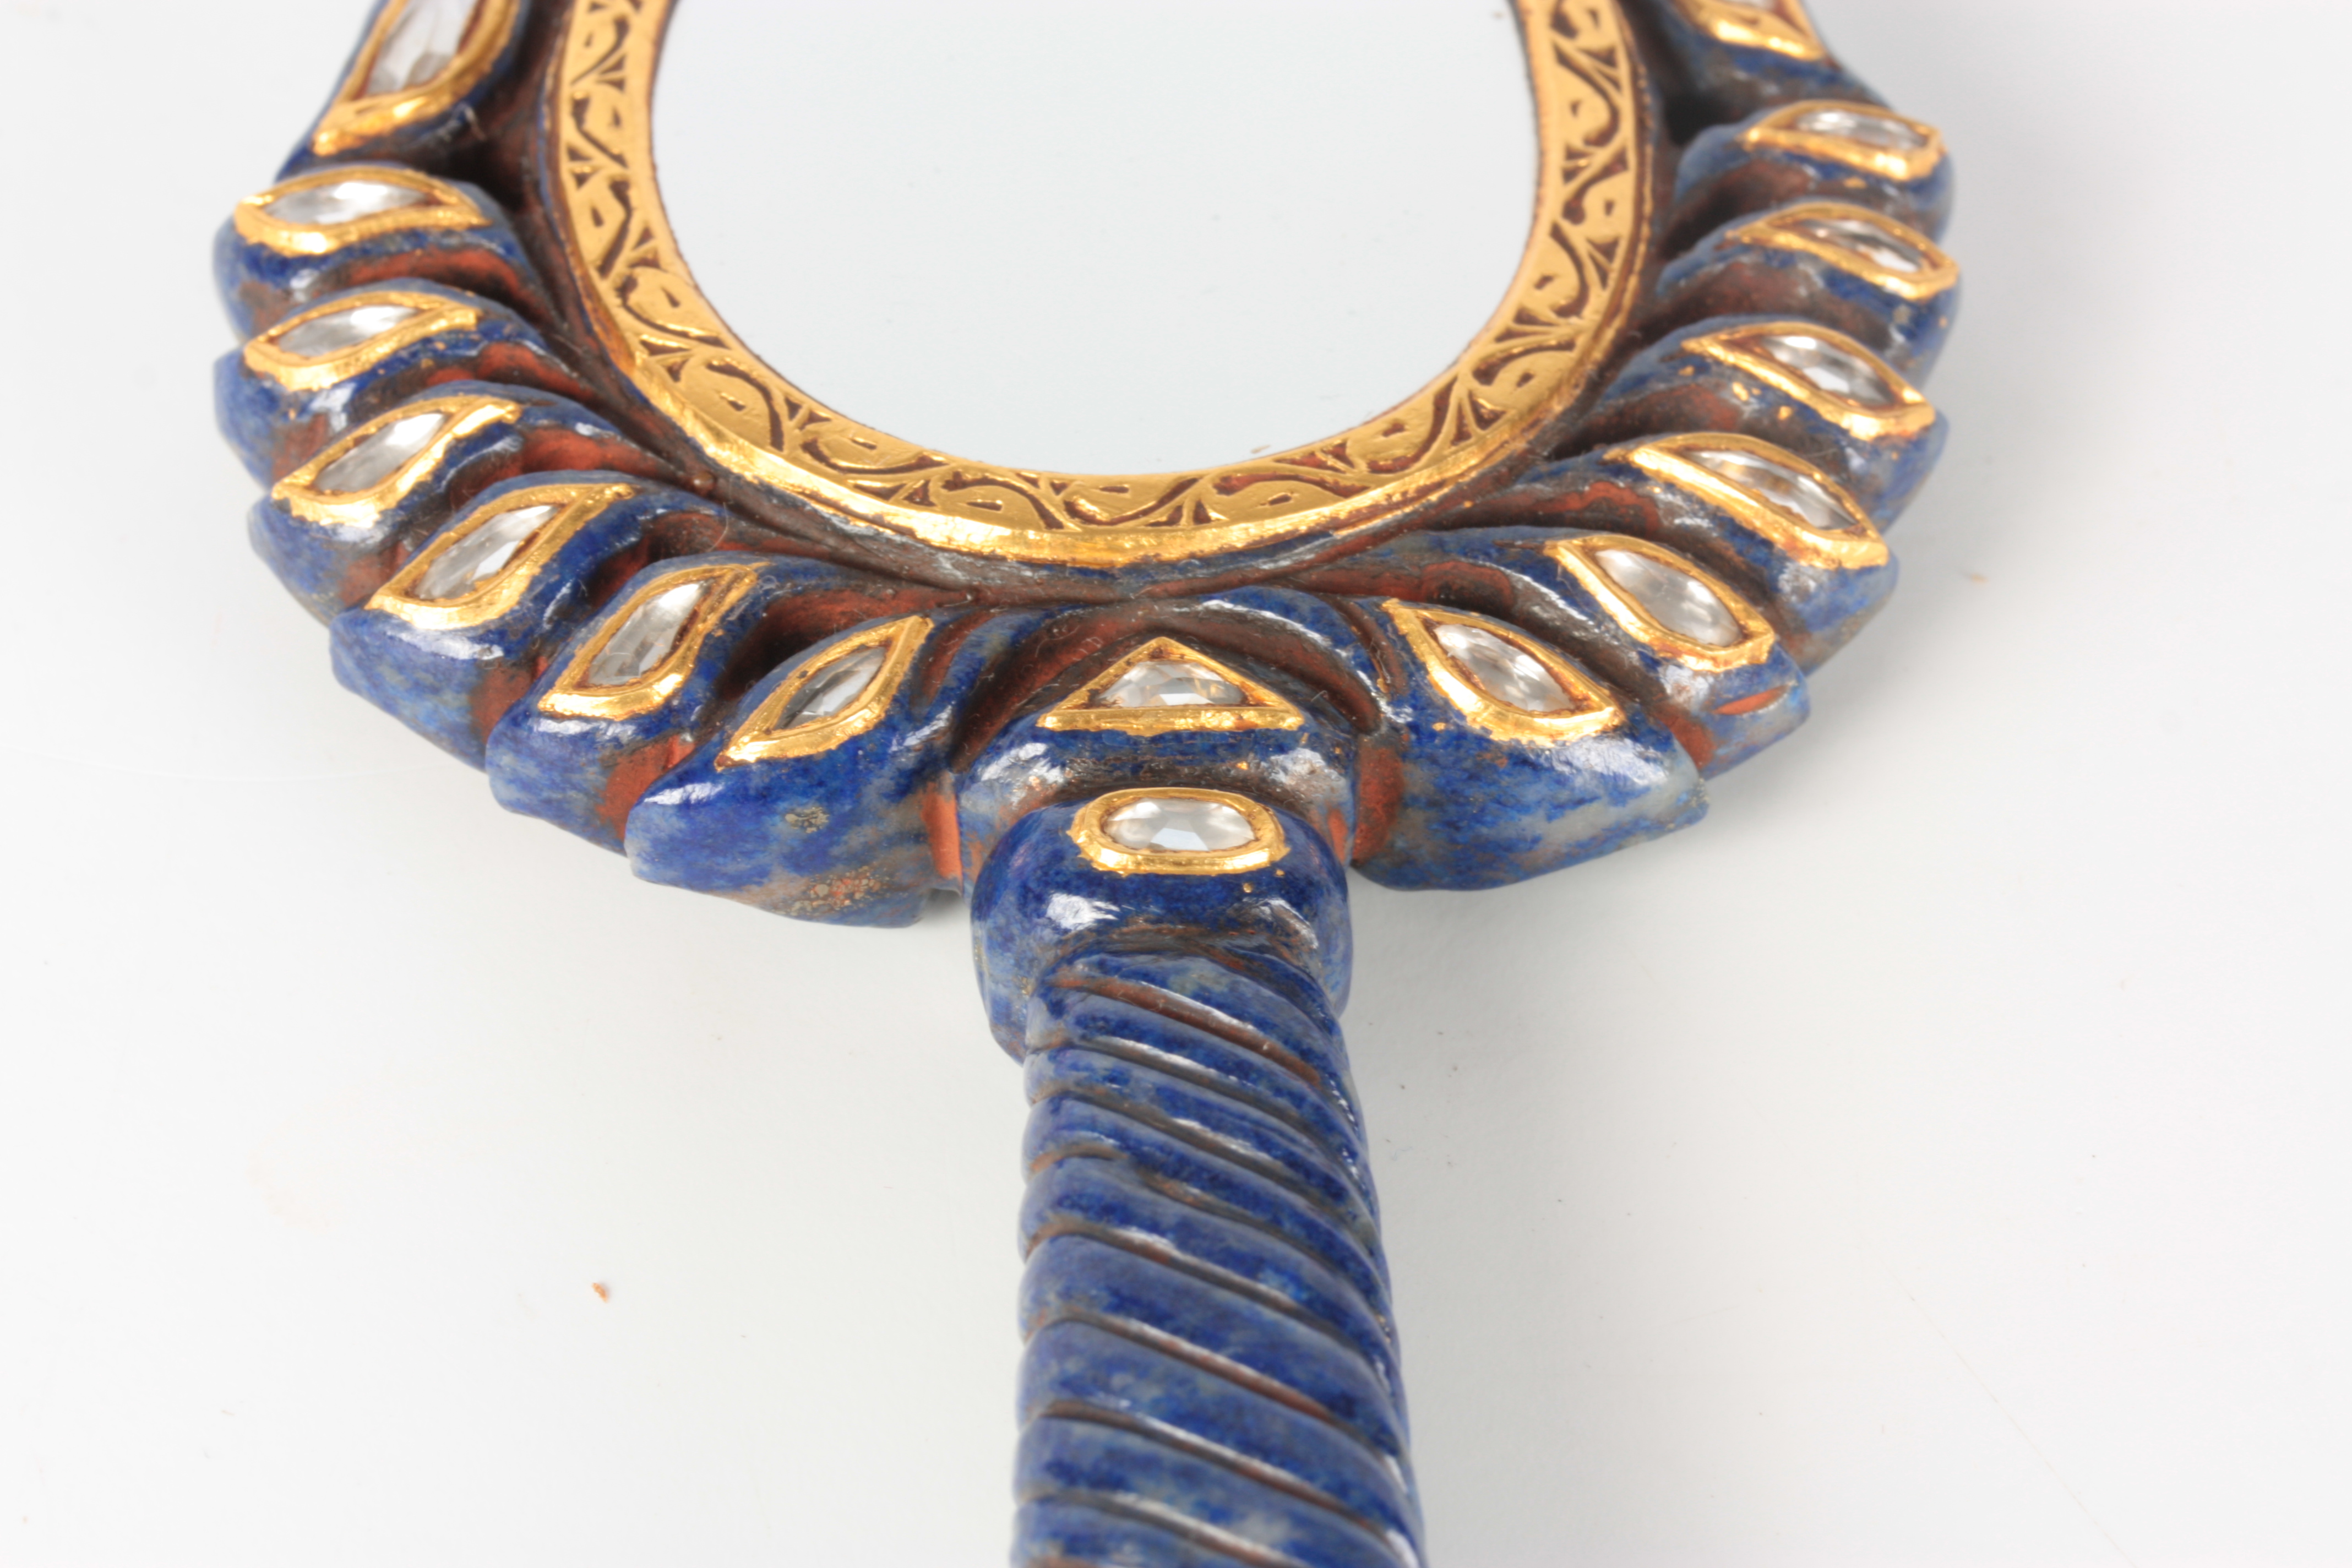 AN 20TH CENTURY LAPIS LAZULI AND DIAMOND SET CARVED HAND MIRROR the peacock and twisted handle - Image 6 of 6